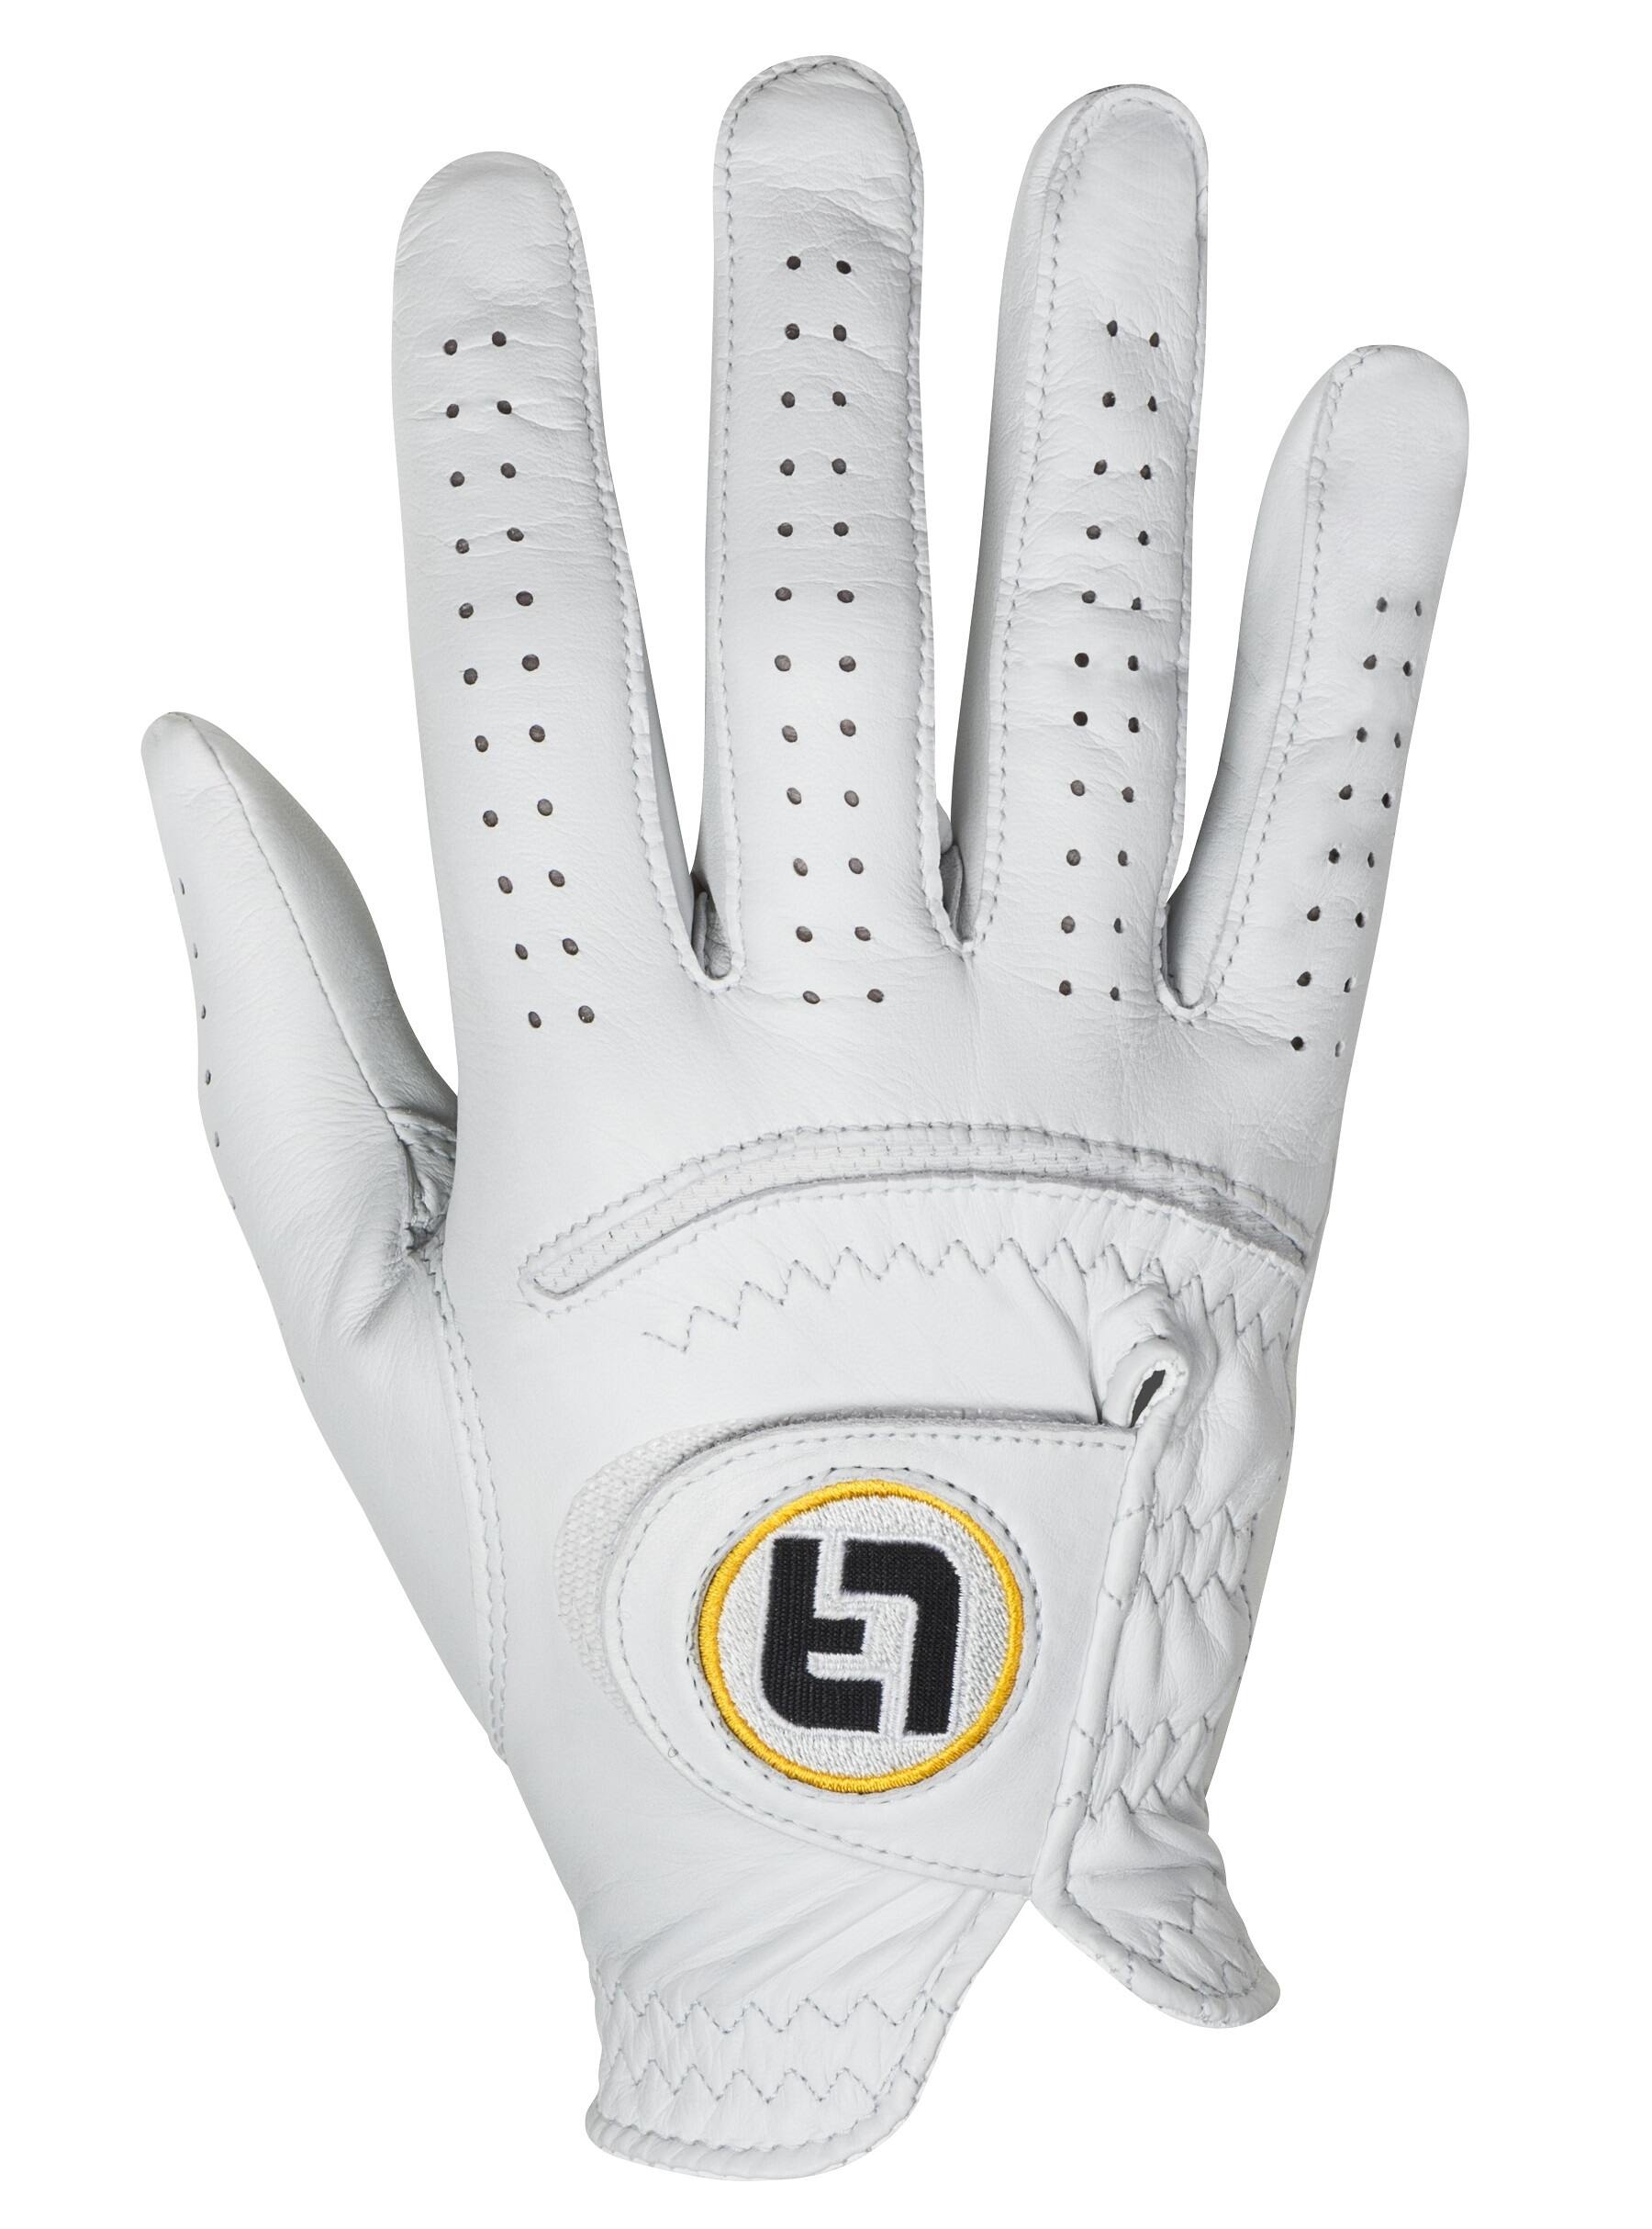 FootJoy Golf Mens Right Handed Pure Touch Limited Glove | RockBottomGolf.com